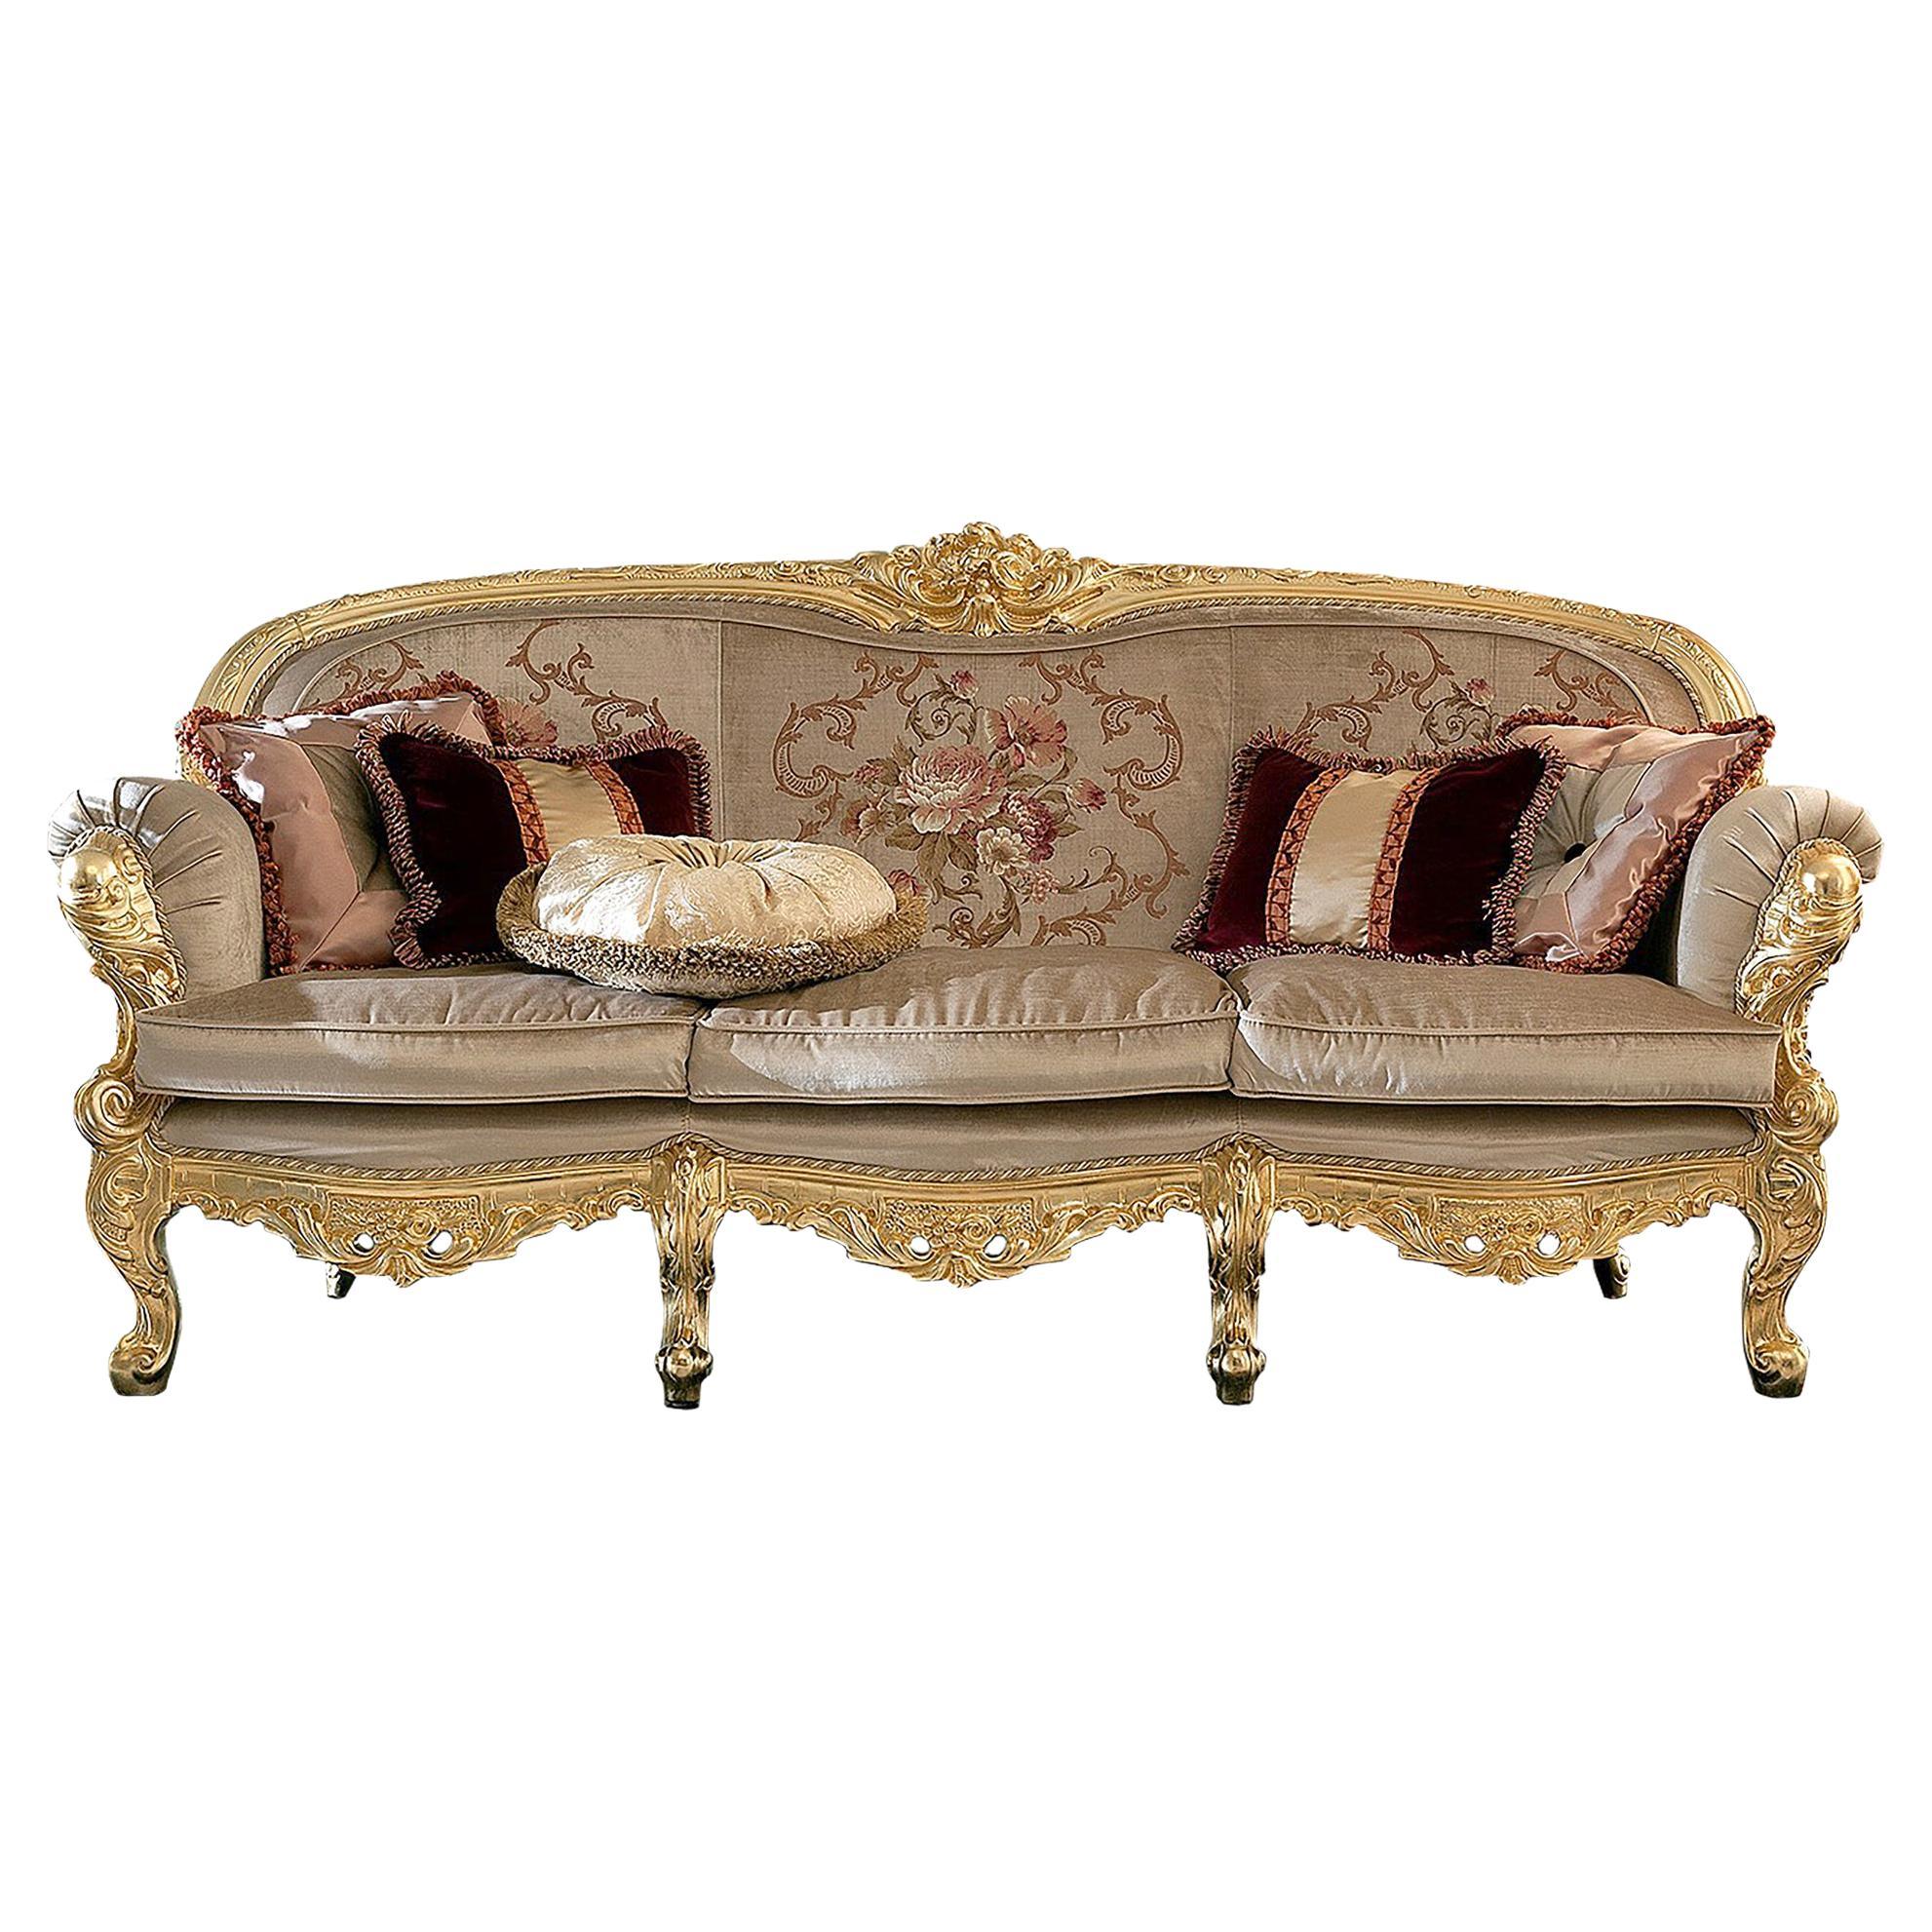 Golden Palace Sofa in Limited Massive Wood with Gold Leaf Ornament Made in Italy For Sale